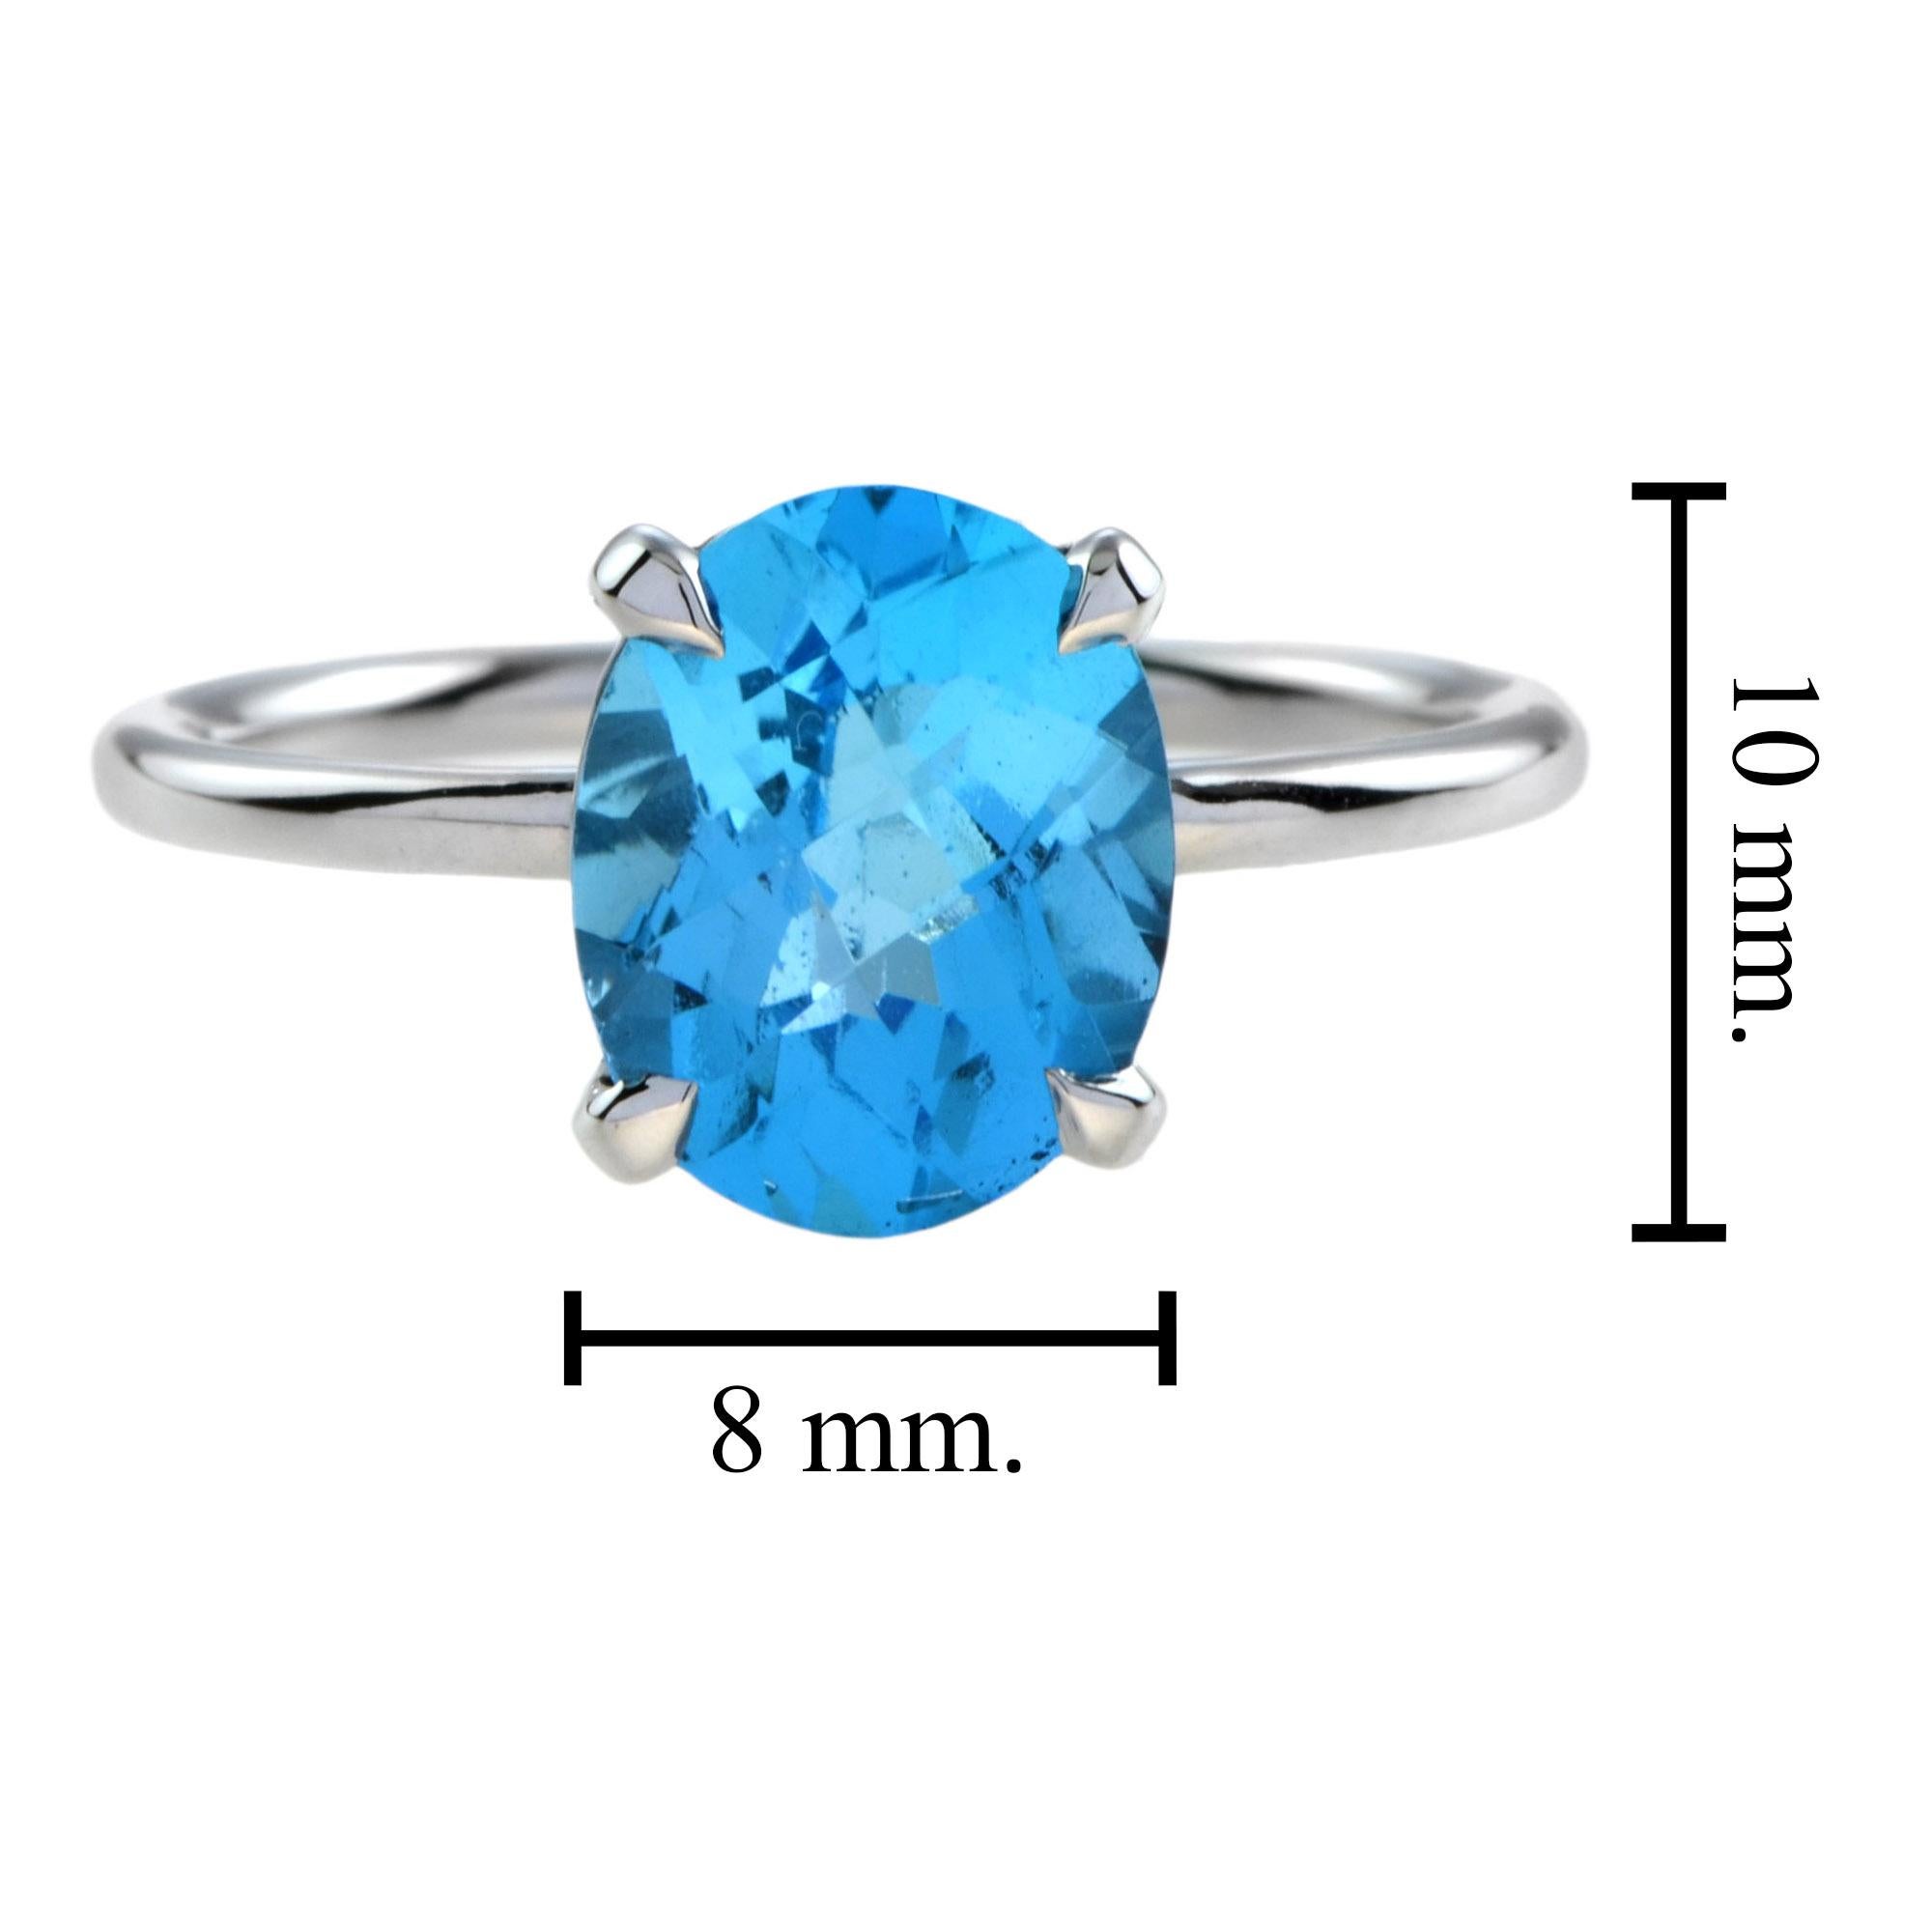 Women's 3.50 ct. Oval Swiss Blue Topaz Solitaire Engagement Ring in 9K White Gold For Sale